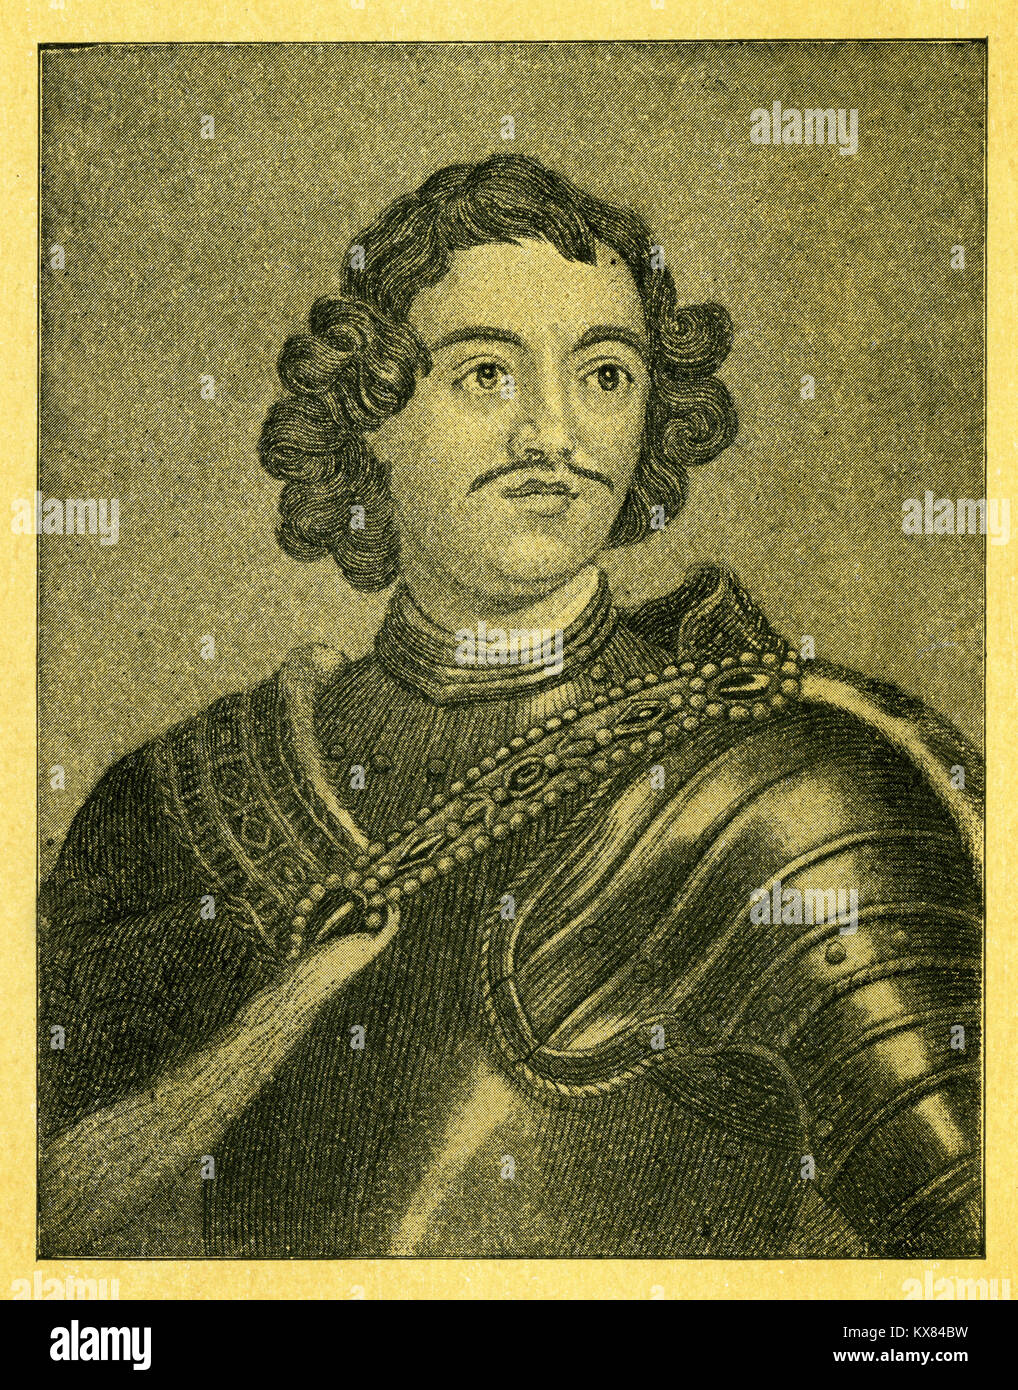 Engraving of Peter the Great (1672 - 1725), Emperor of Russia from 1682 - 1725. From Peter the Great by Jacob Abbott, 1887. Stock Photo